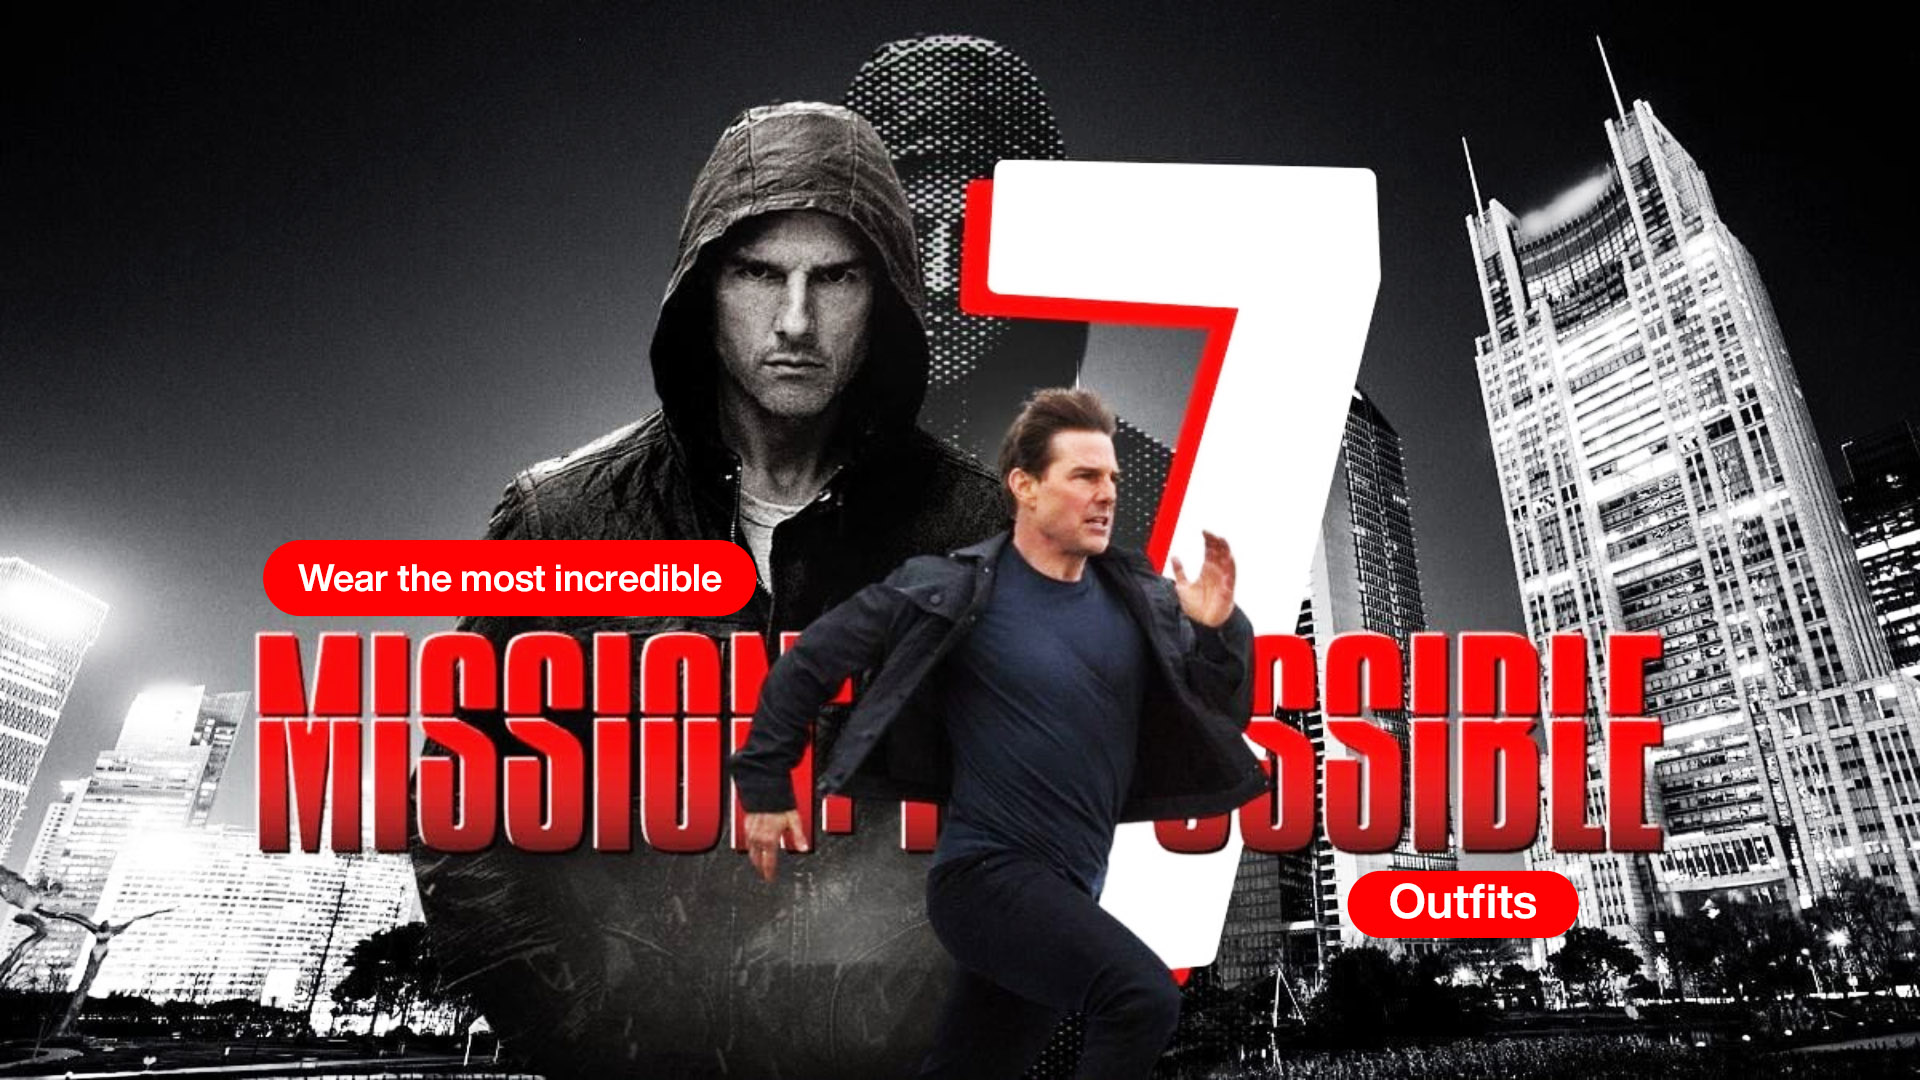 Wear the most incredible Mission Impossible 7 Outfits